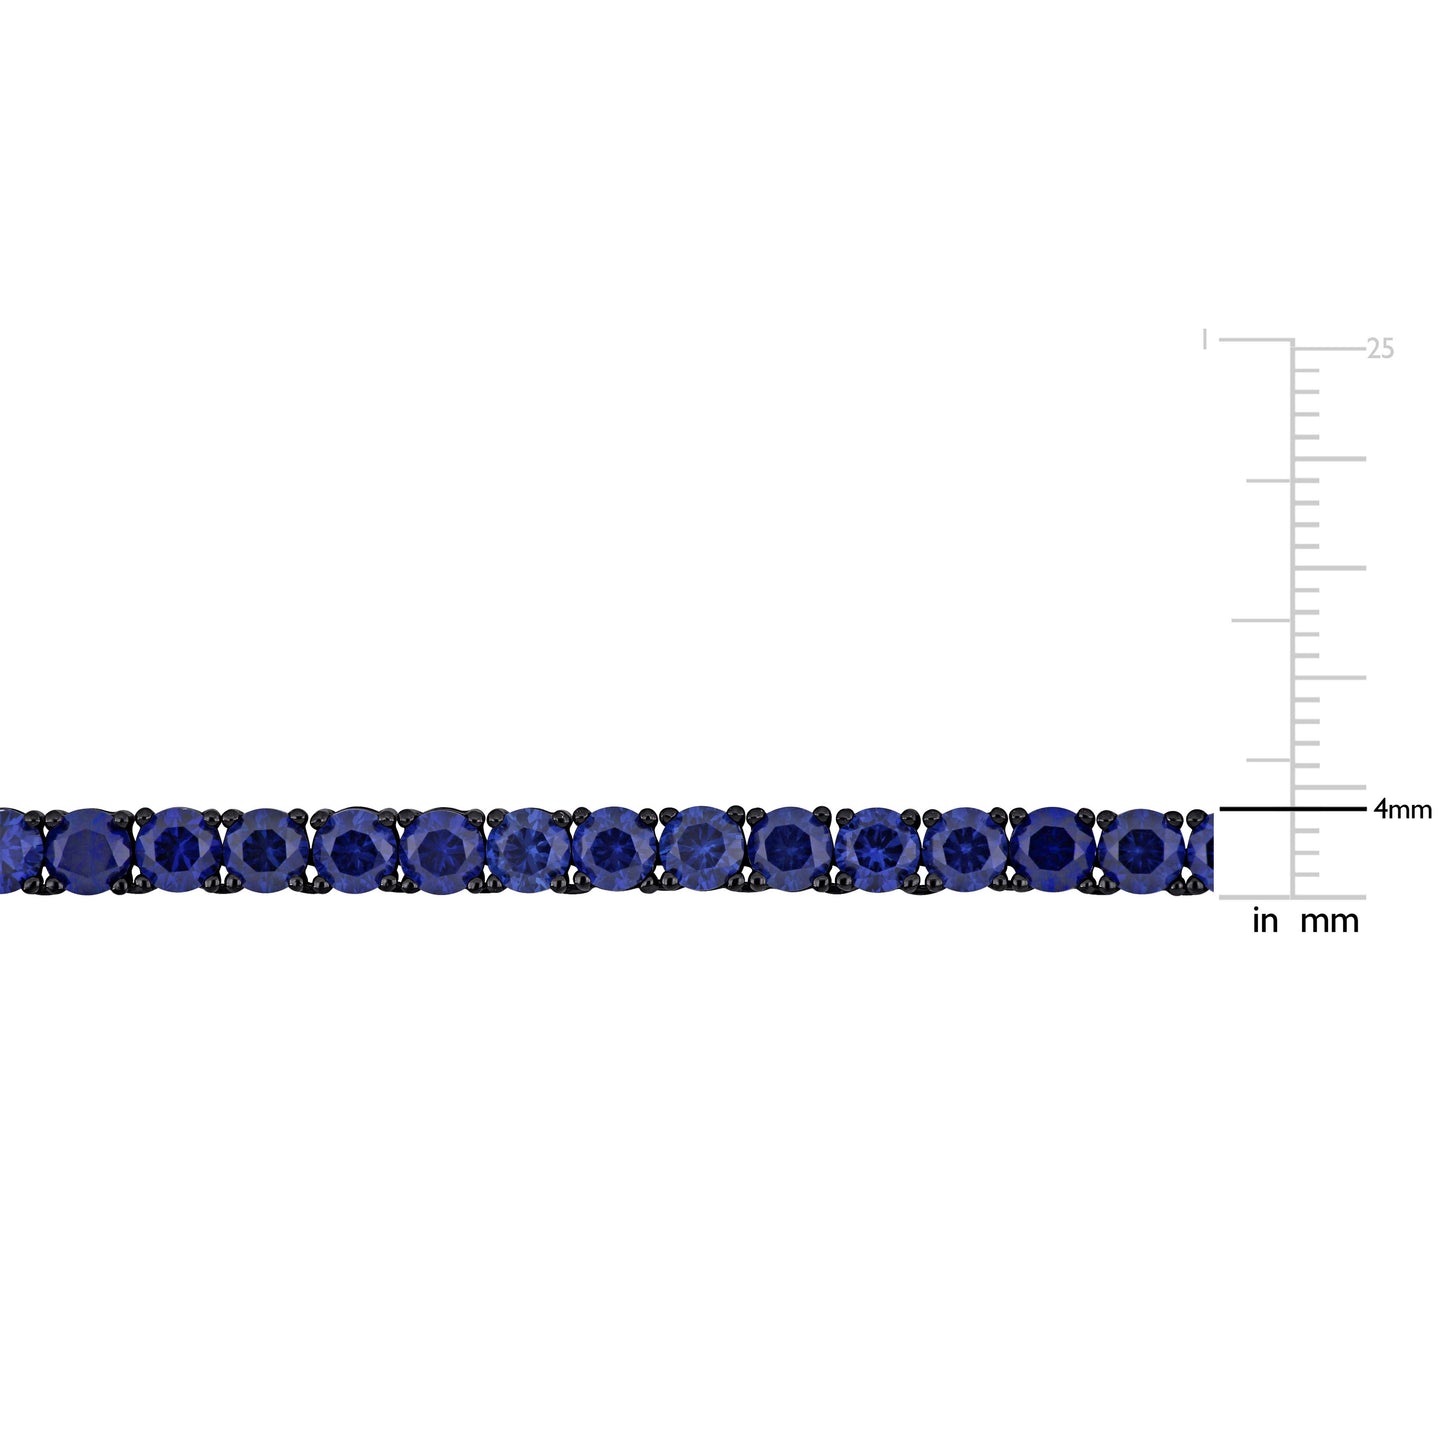 Mens 40 ct TGW 4mm round created blue sapphire necklace w/ box clasp silver white black rhodium plated length (inches): 20